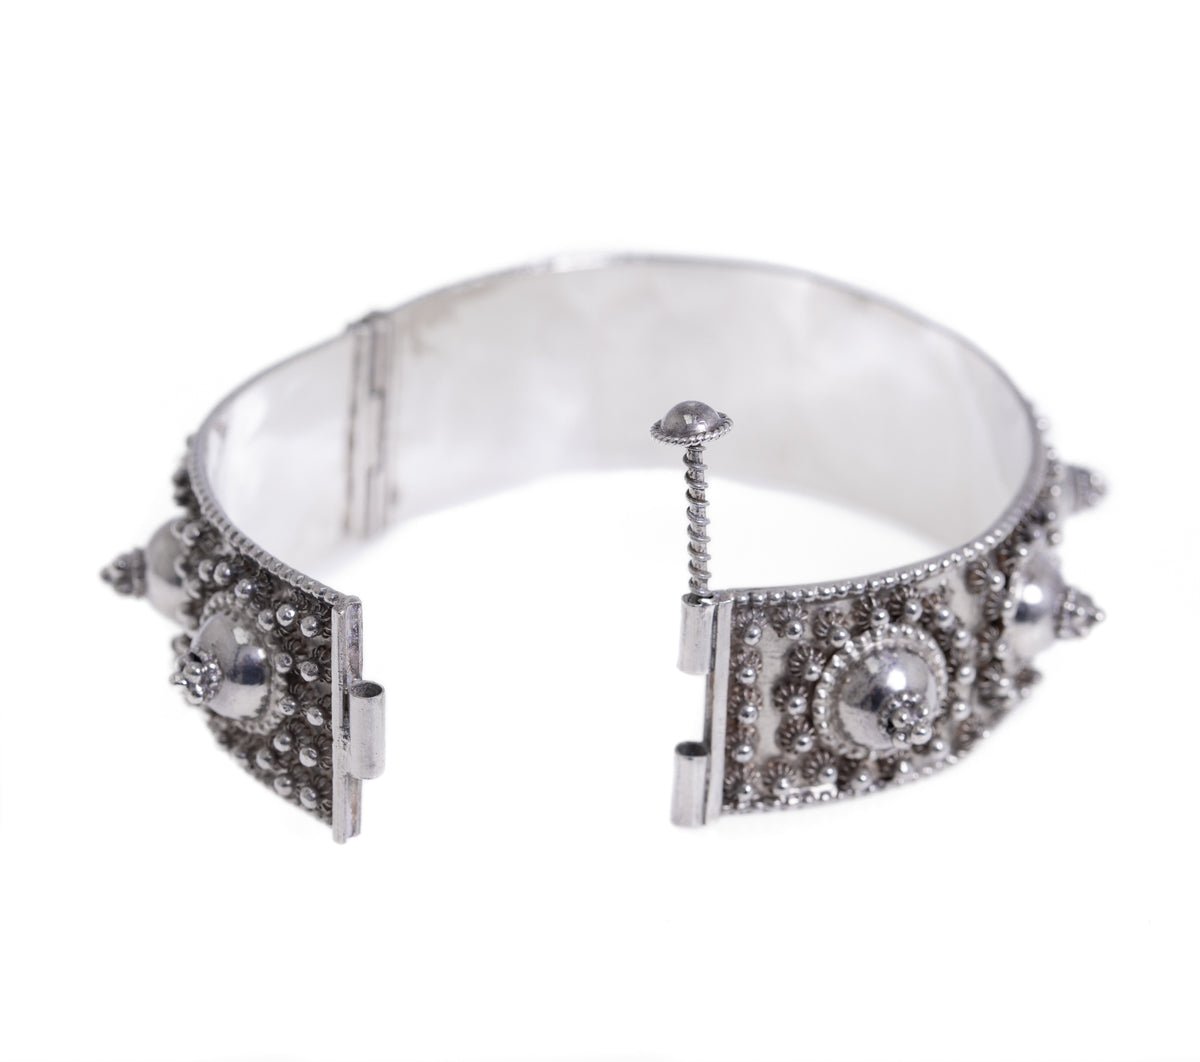 Vintage Indian Silver Hand Made Bangle/Bracelet With Raised Bosses (A1182)